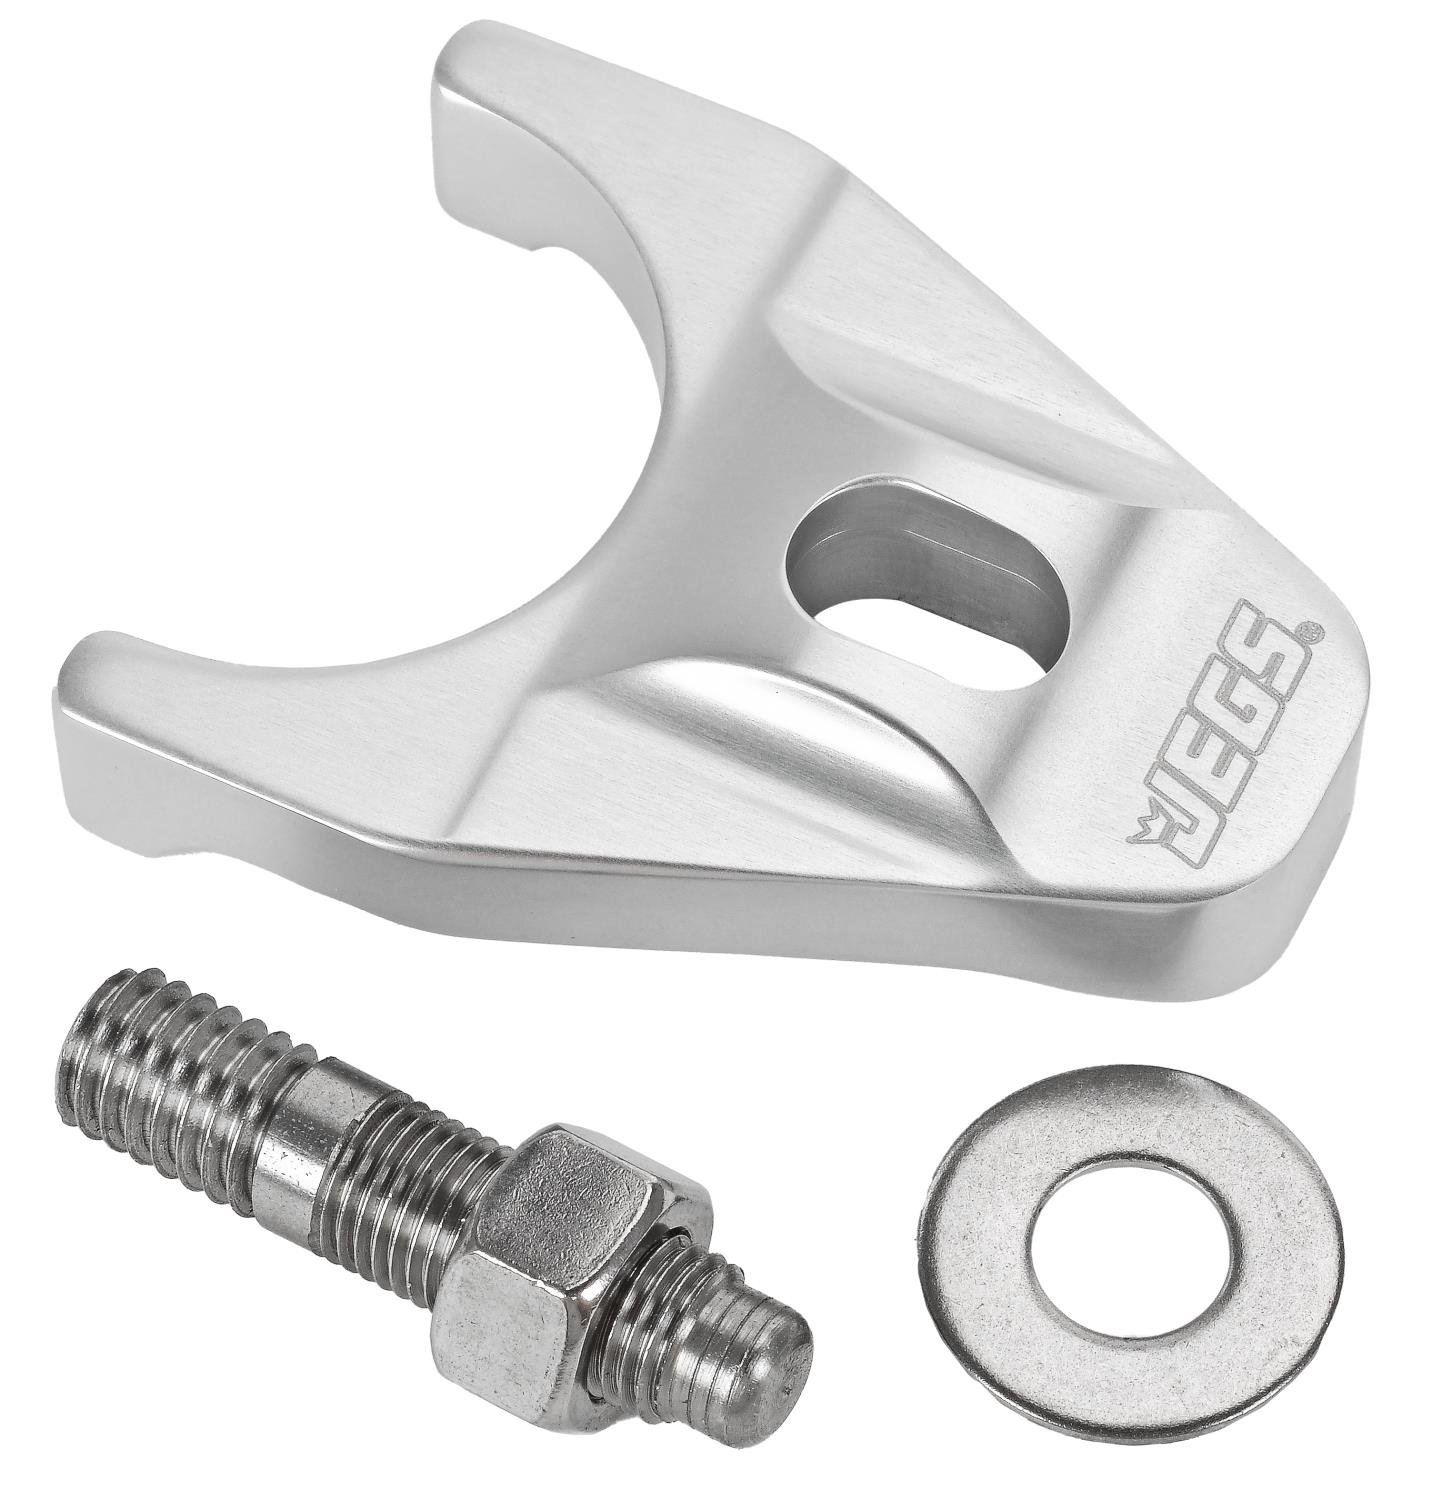 Billet Distributor Hold-Down Clamp Chevy: 90° V6, Small